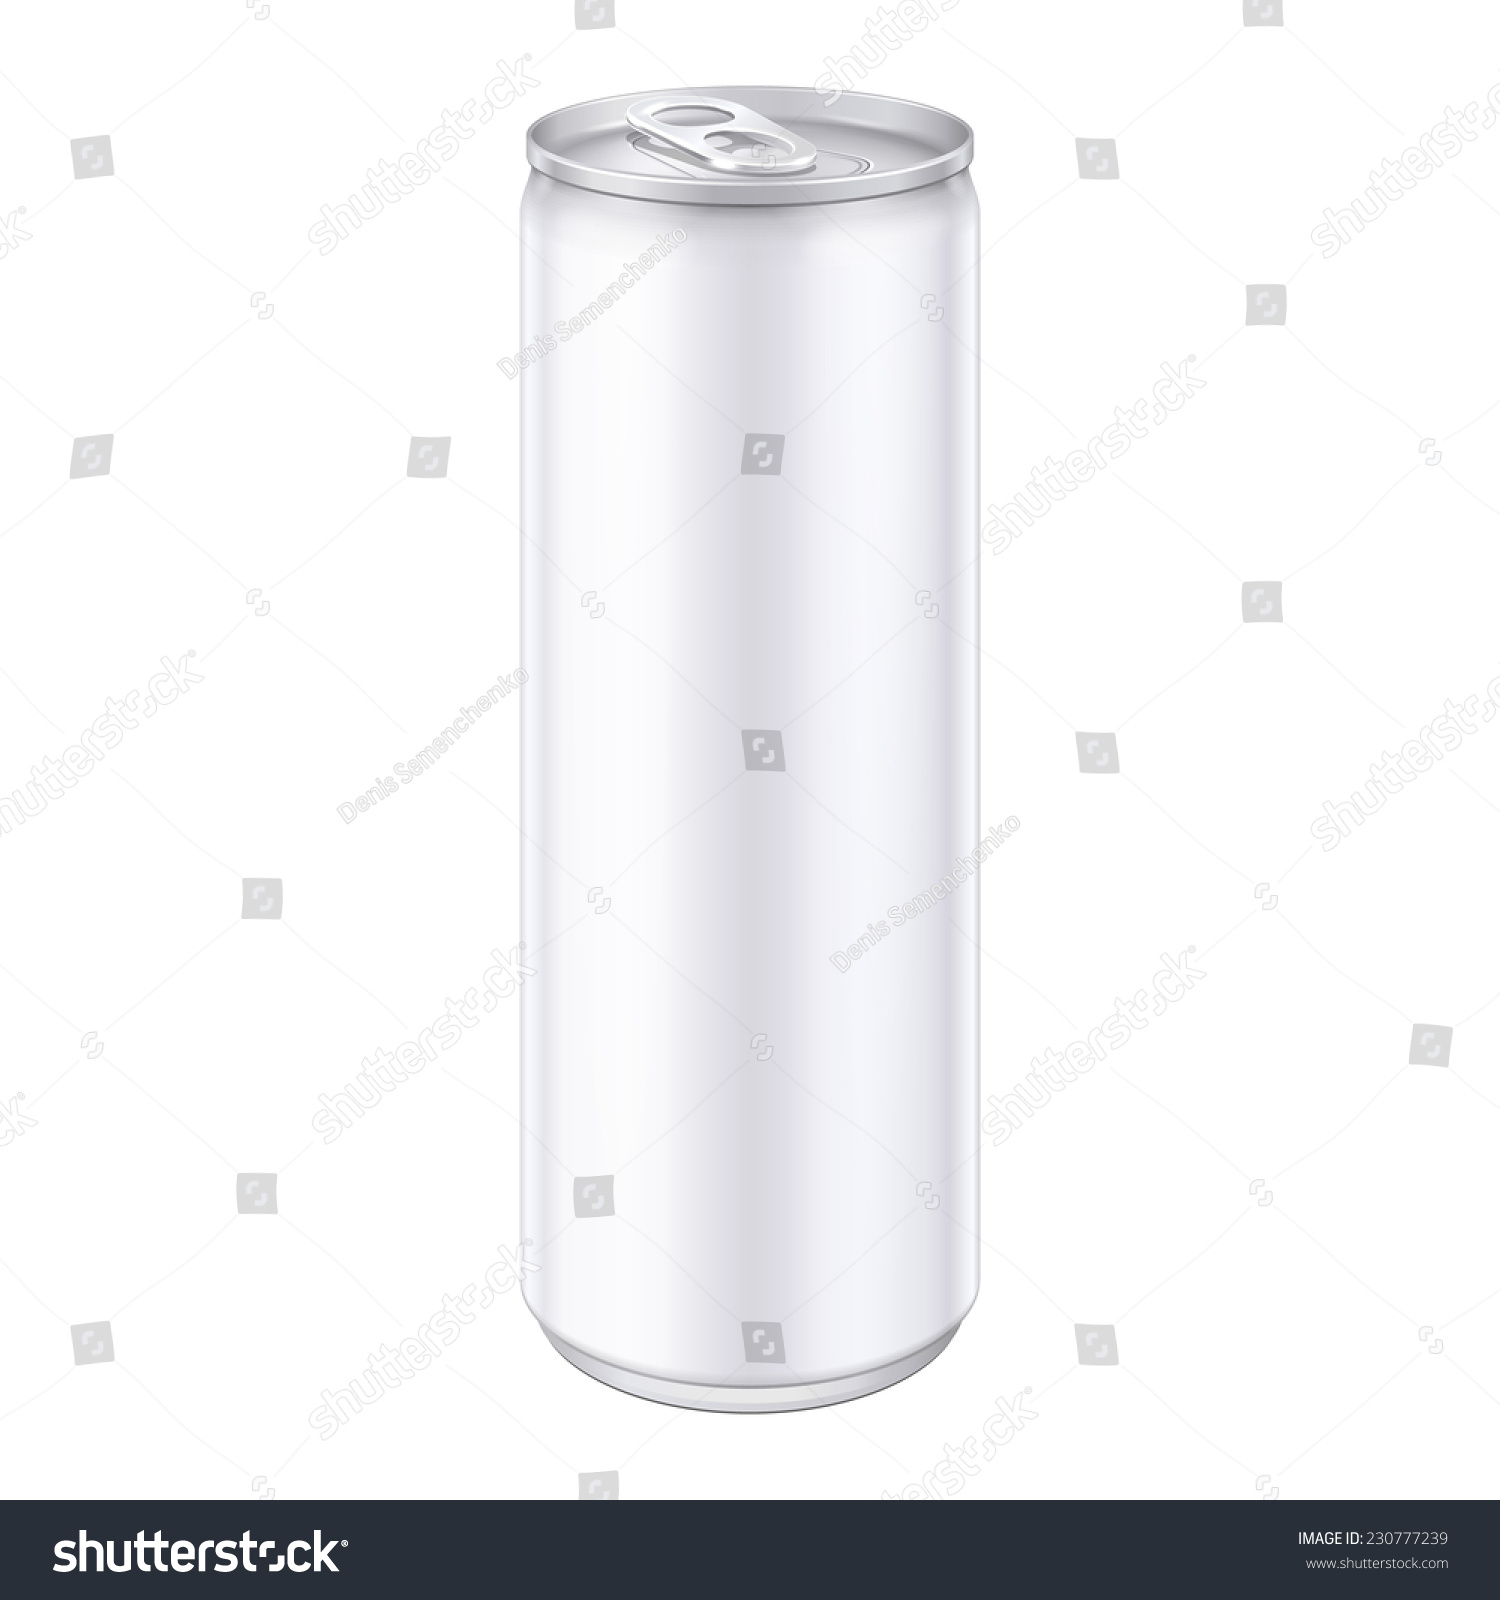 SVG of White Metal Aluminum Beverage Drink Can 250ml. Mockup Template Ready For Your Design. Isolated On White Background. Product Packing. Vector EPS10 Product Packing Vector EPS10 svg